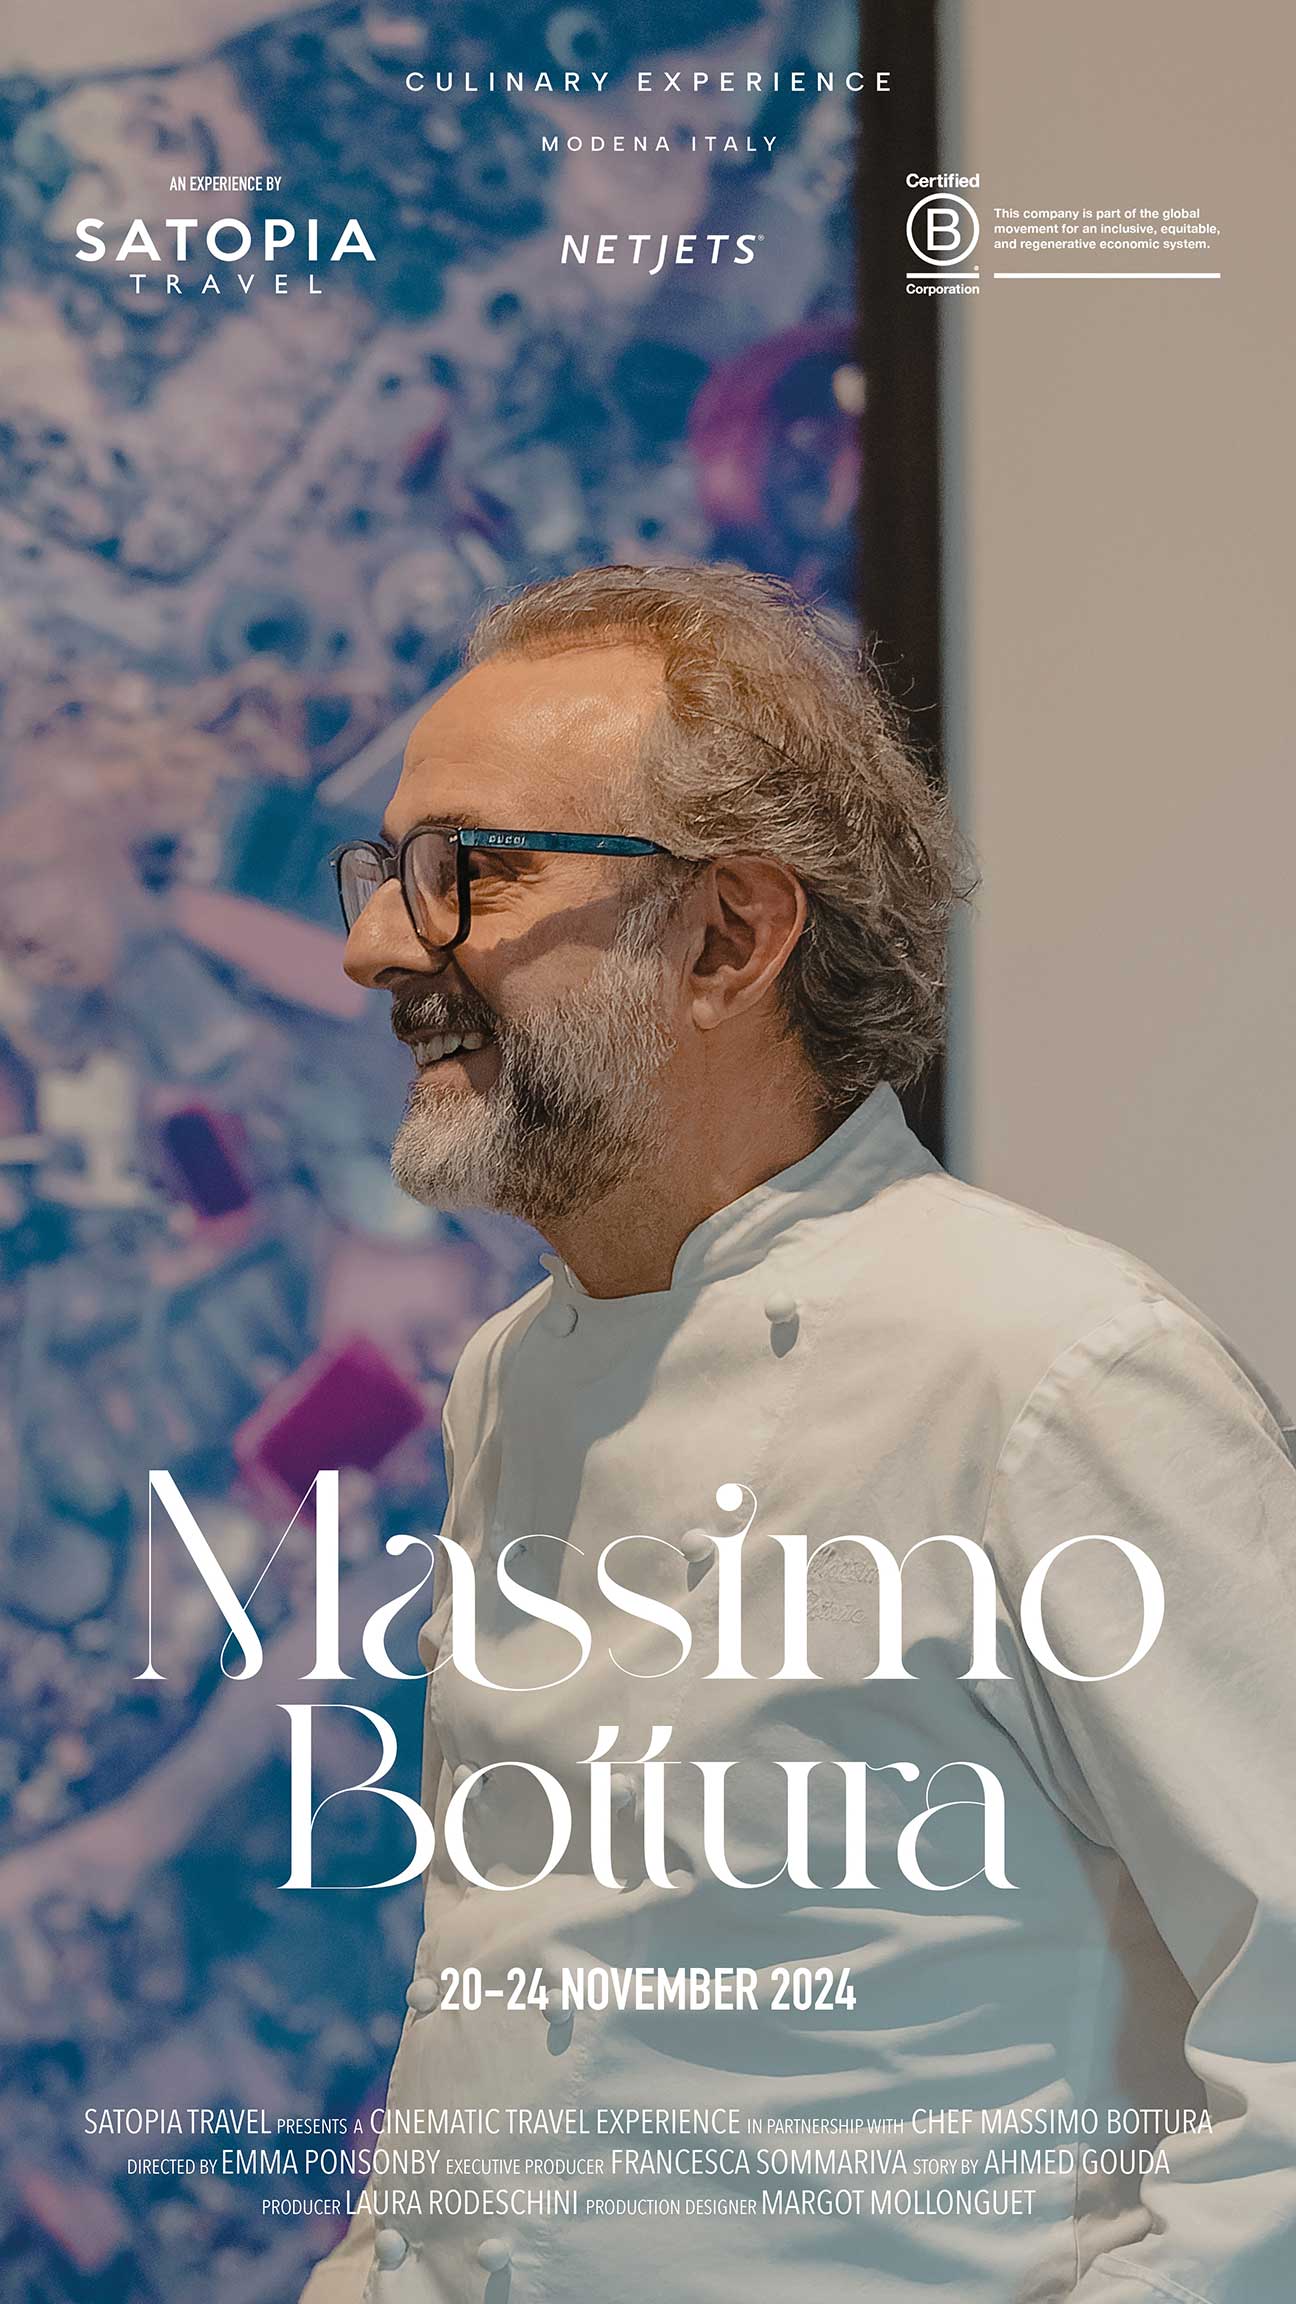 Vertical Movie poster: Satopia Travel Hosted Culinary Experience with Massimo Bottura in Italy, featuring an image of the world-renowned chef, Massimo Bottura.